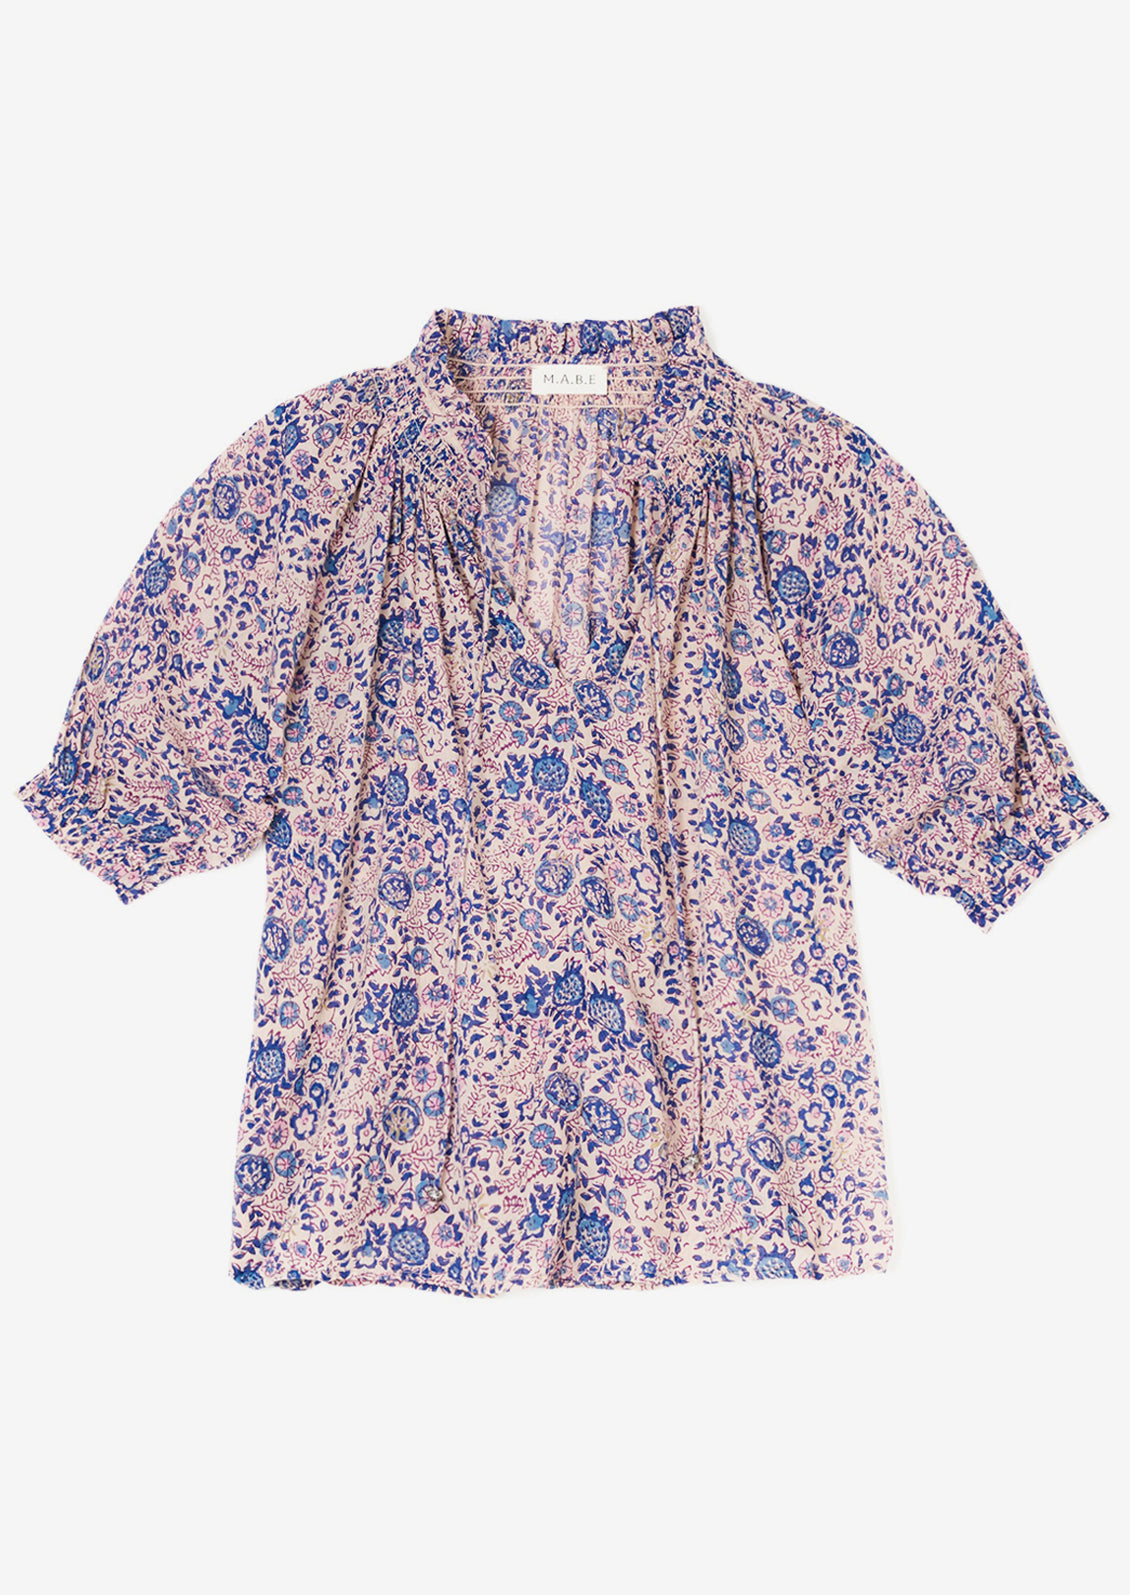 A purple, blue, and white floral printed shirt.